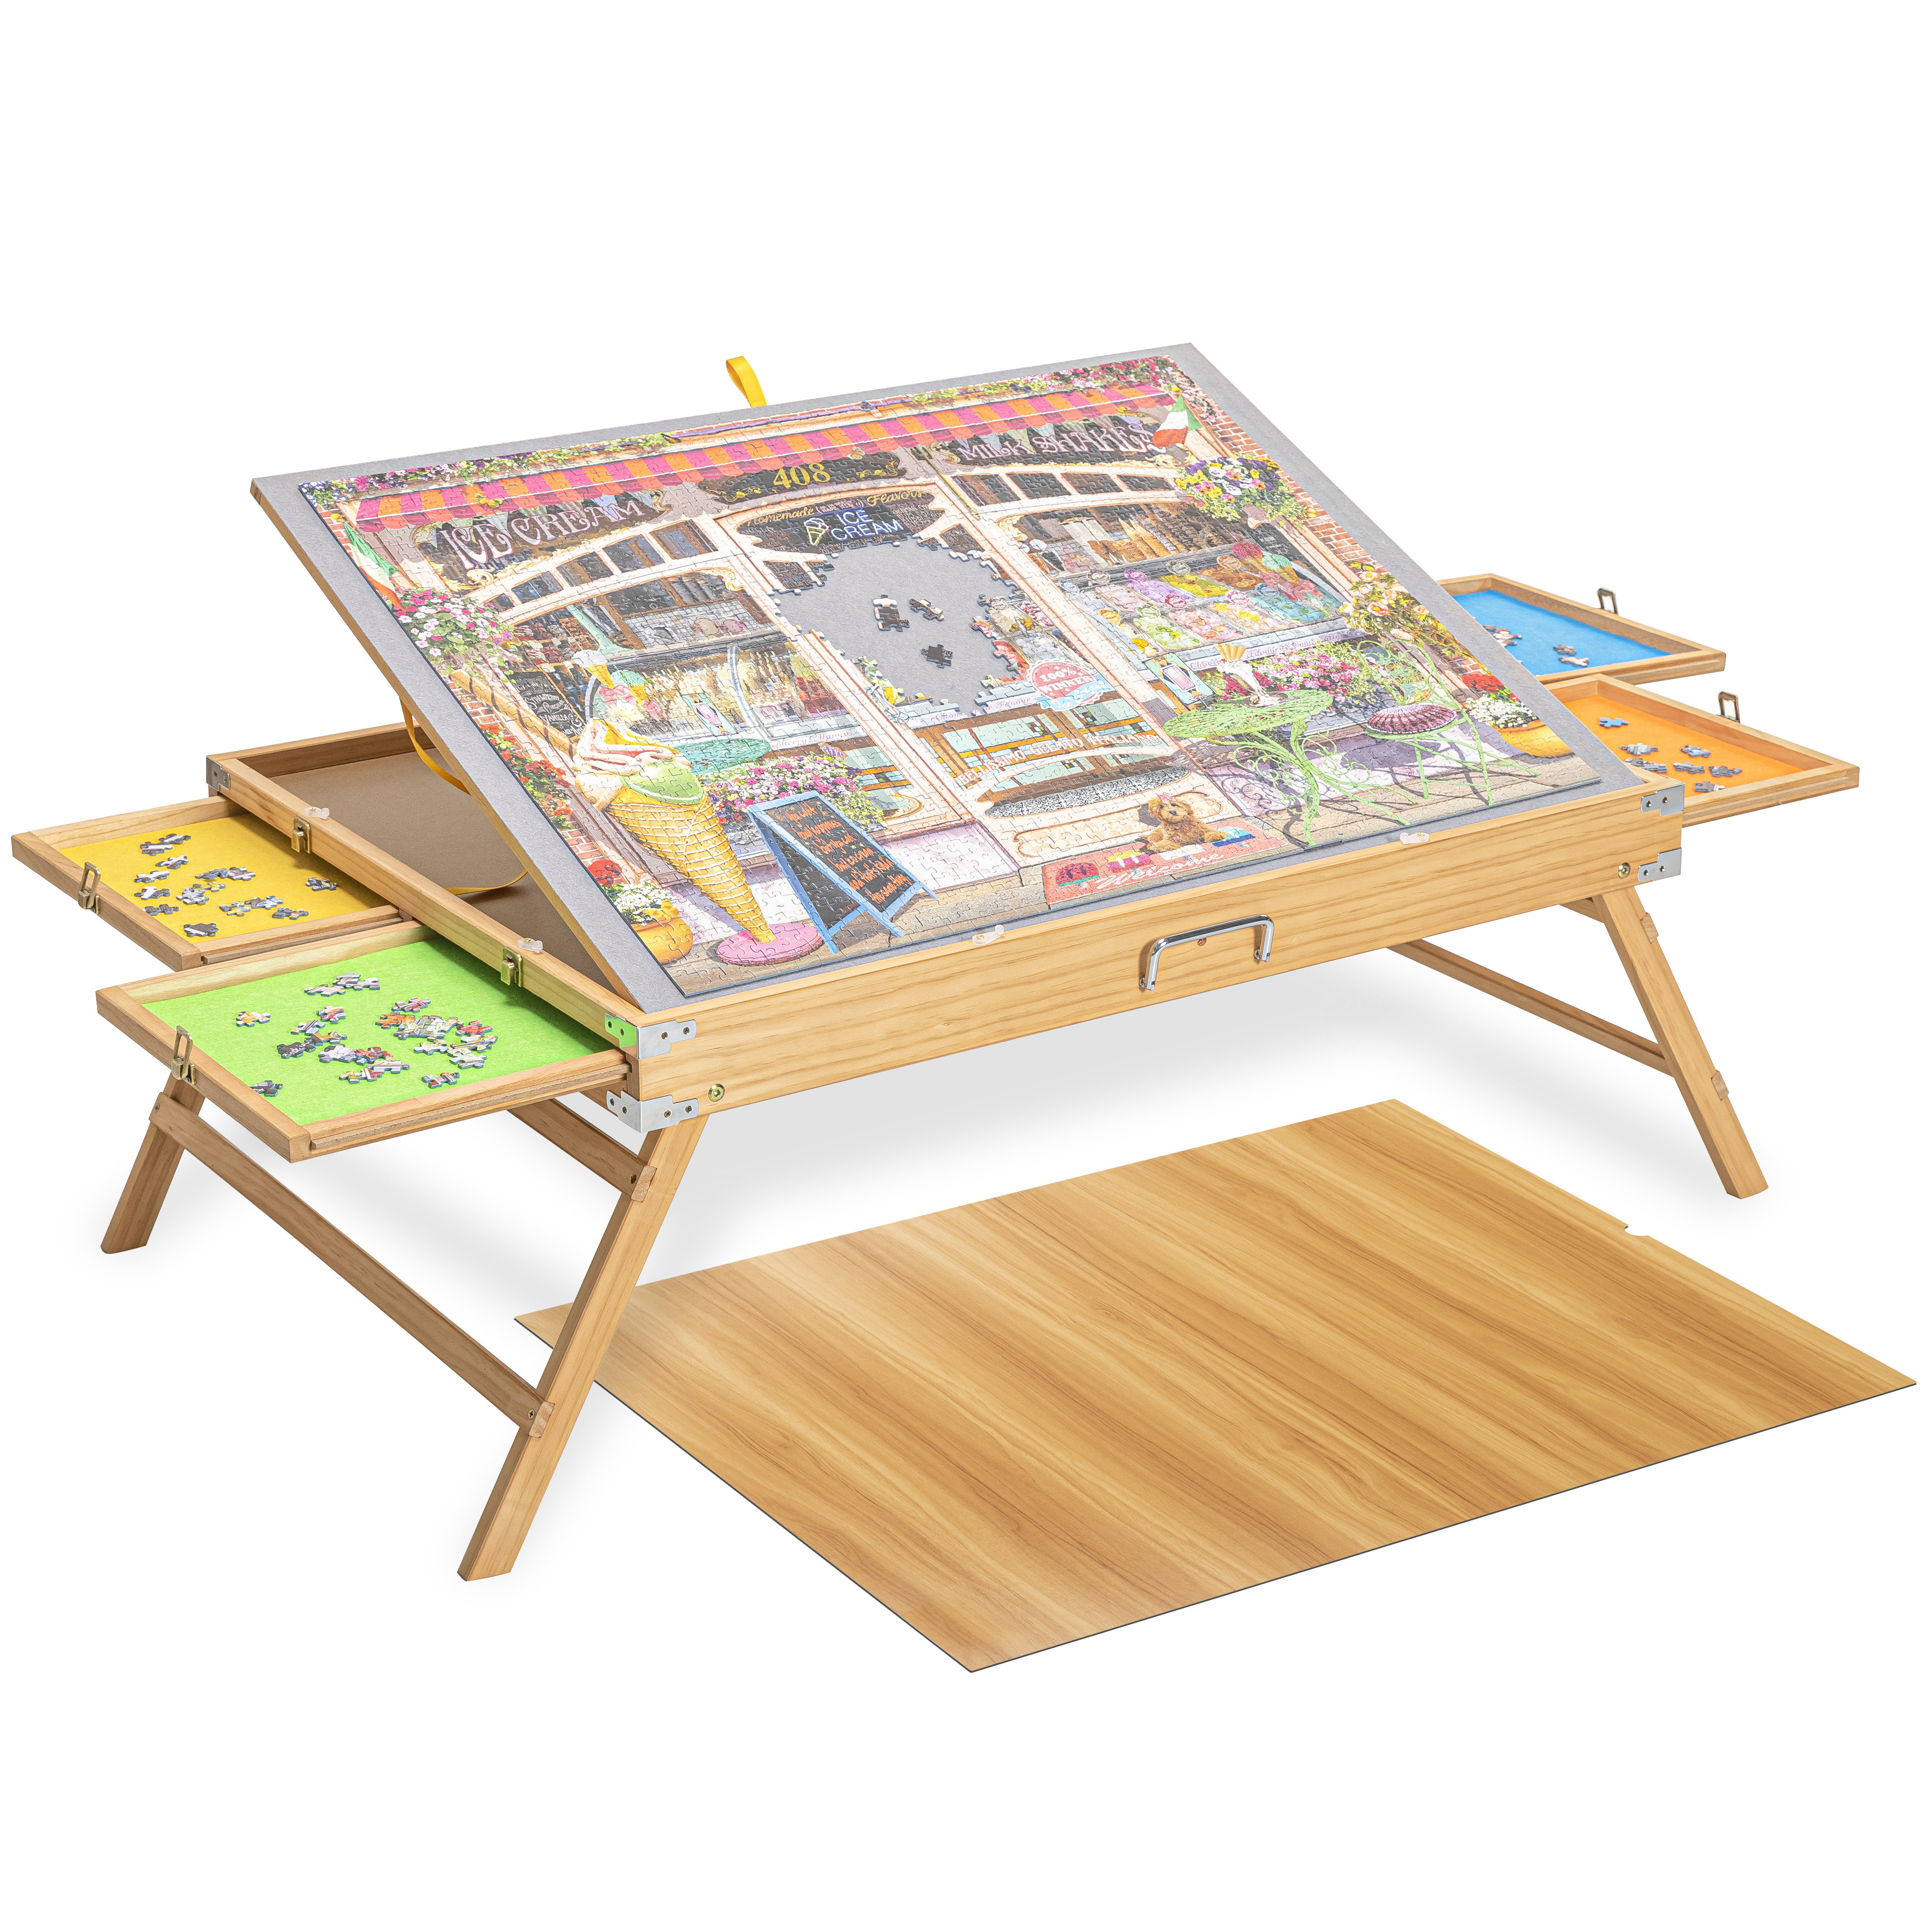 Adjustable Puzzle Table Puzzle Easel Portable Board for Up to 1000